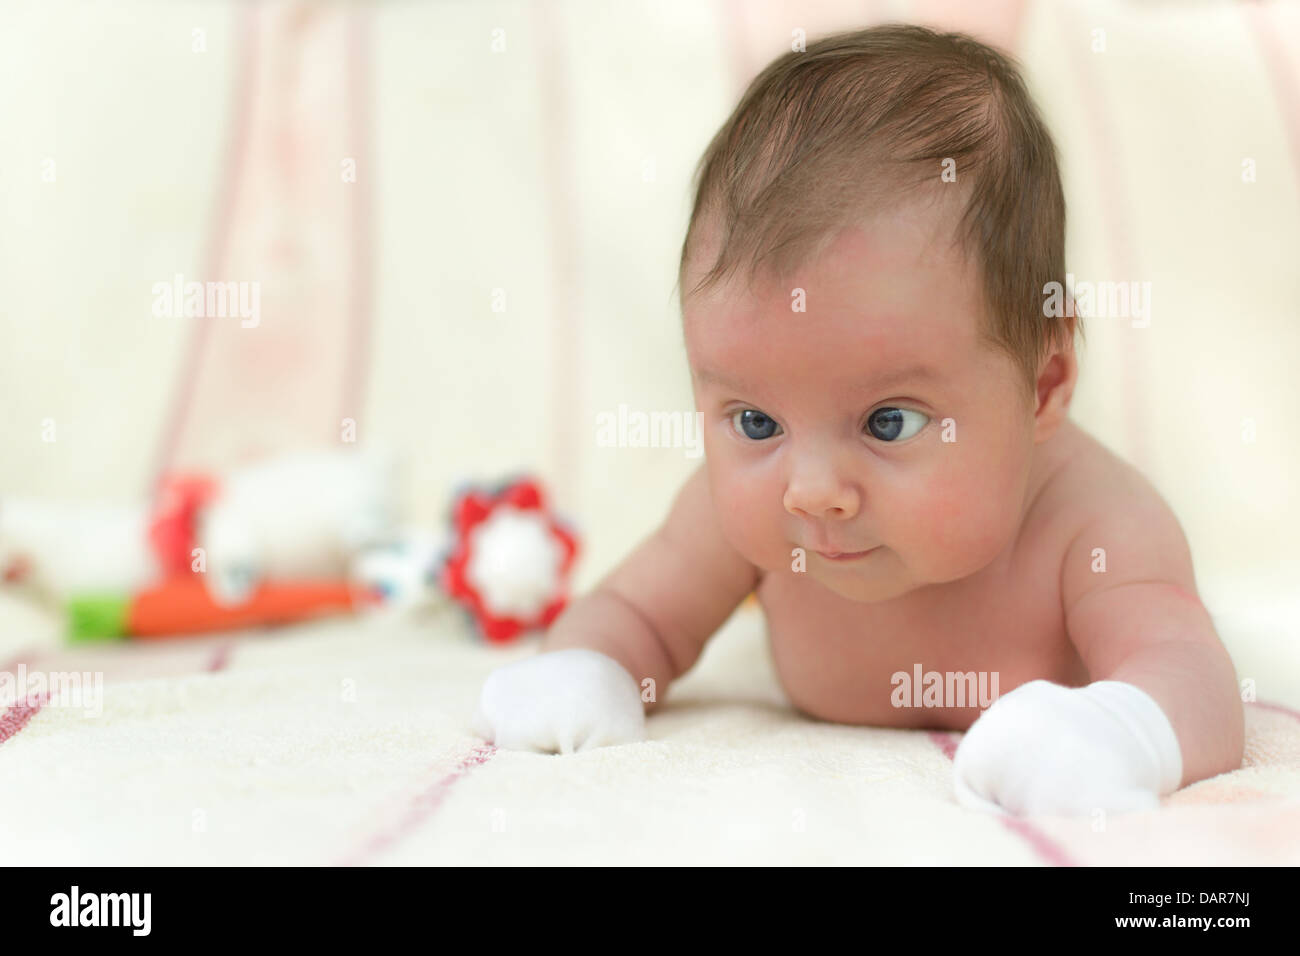 Infant baby (1 month old) lying on tummy. Shallow depth of field Stock Photo